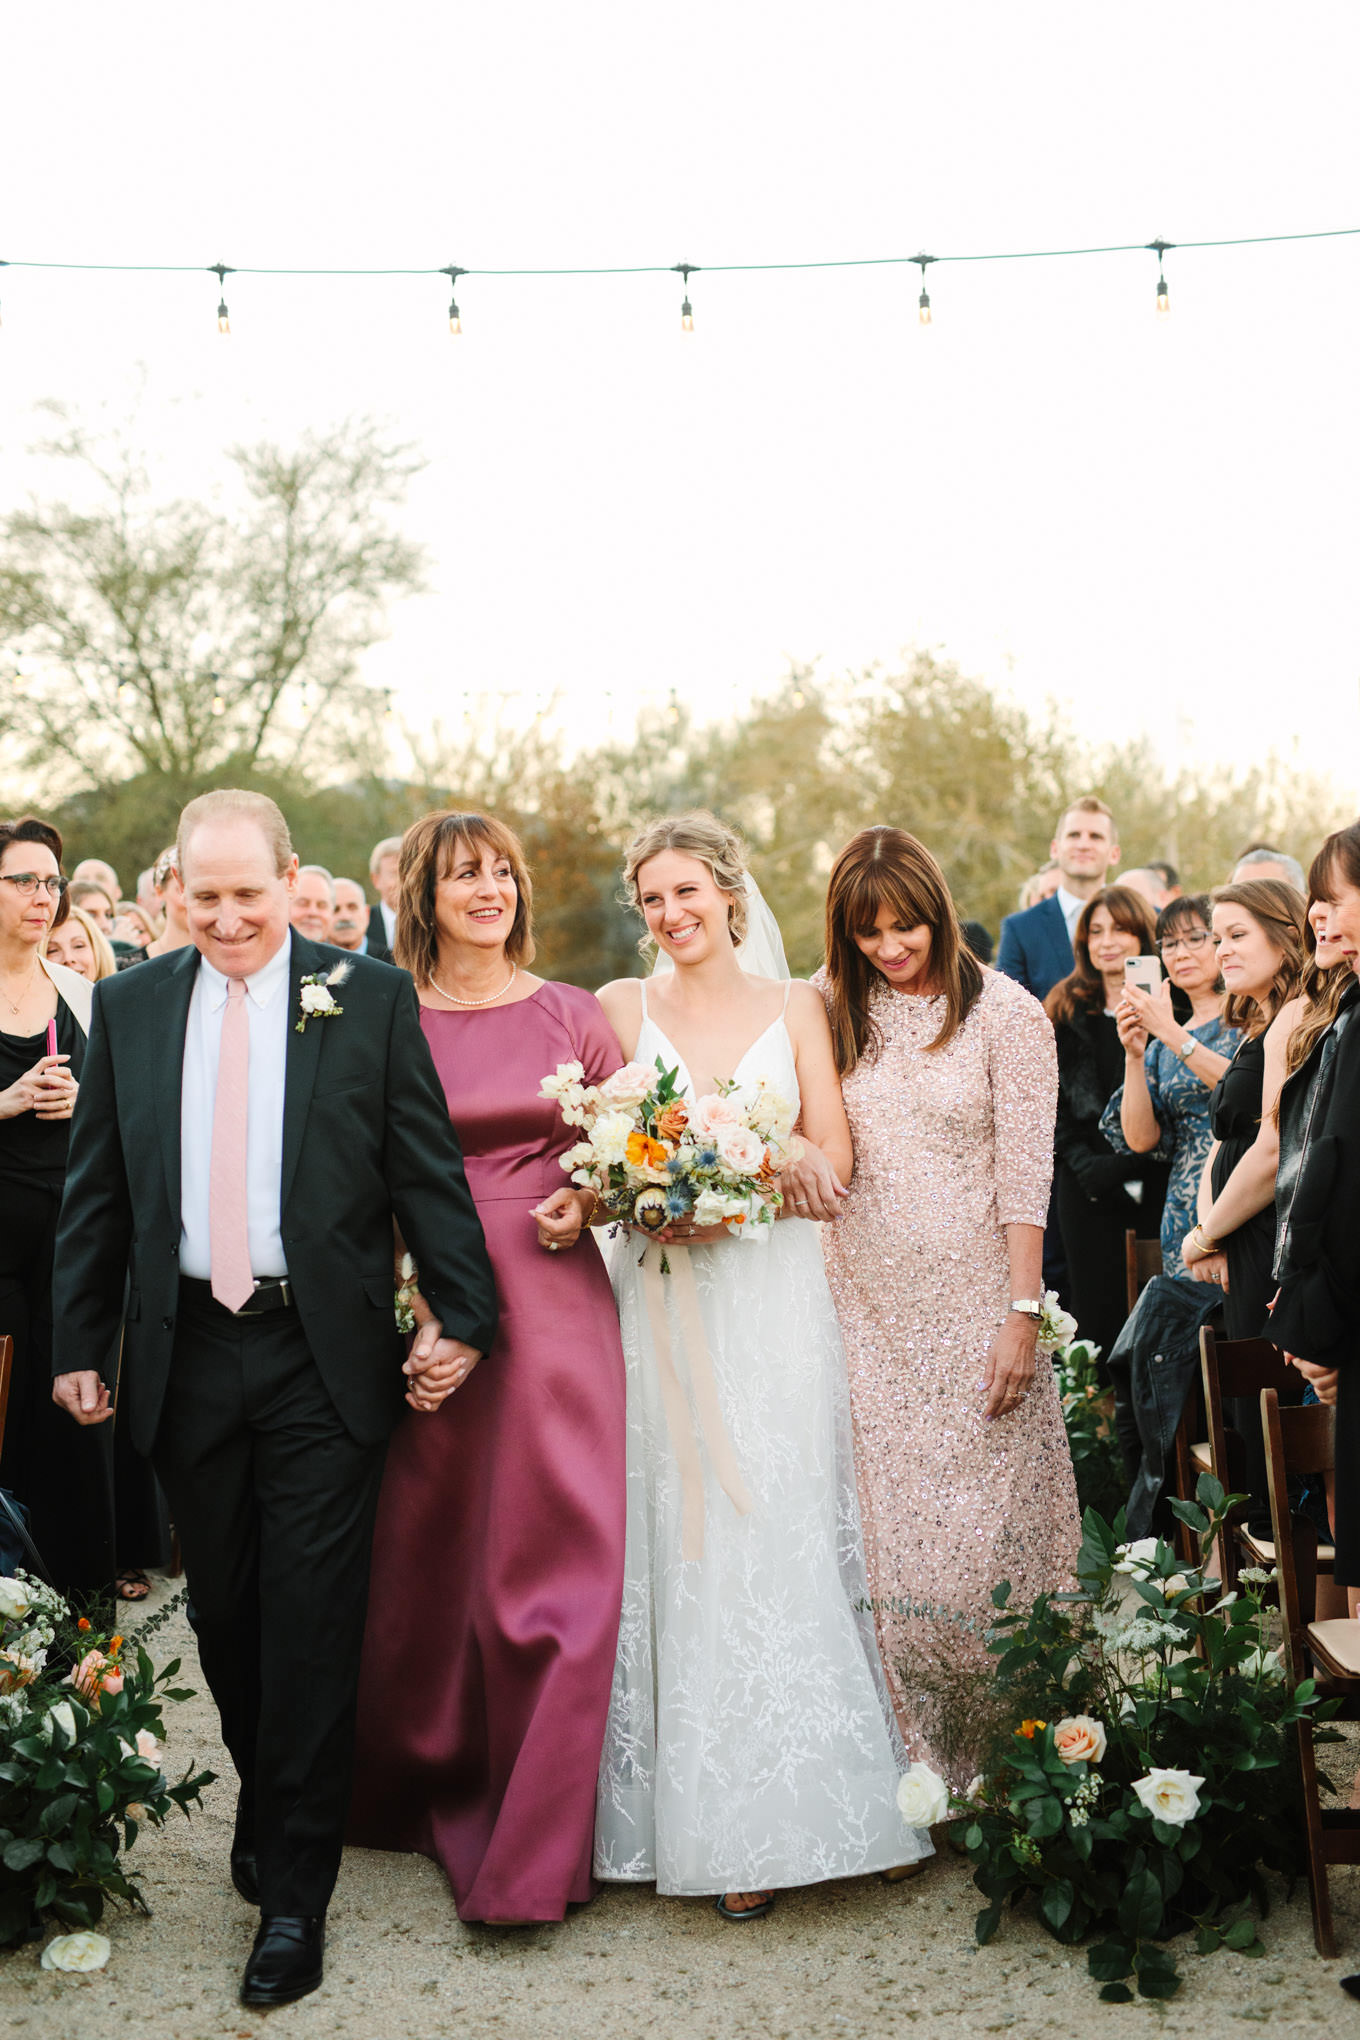 Bride being escorted down the aisle | Living Desert Zoo & Gardens wedding with unique details | Elevated and colorful wedding photography for fun-loving couples in Southern California |  #PalmSprings #palmspringsphotographer #gardenwedding #palmspringswedding  Source: Mary Costa Photography | Los Angeles wedding photographer 